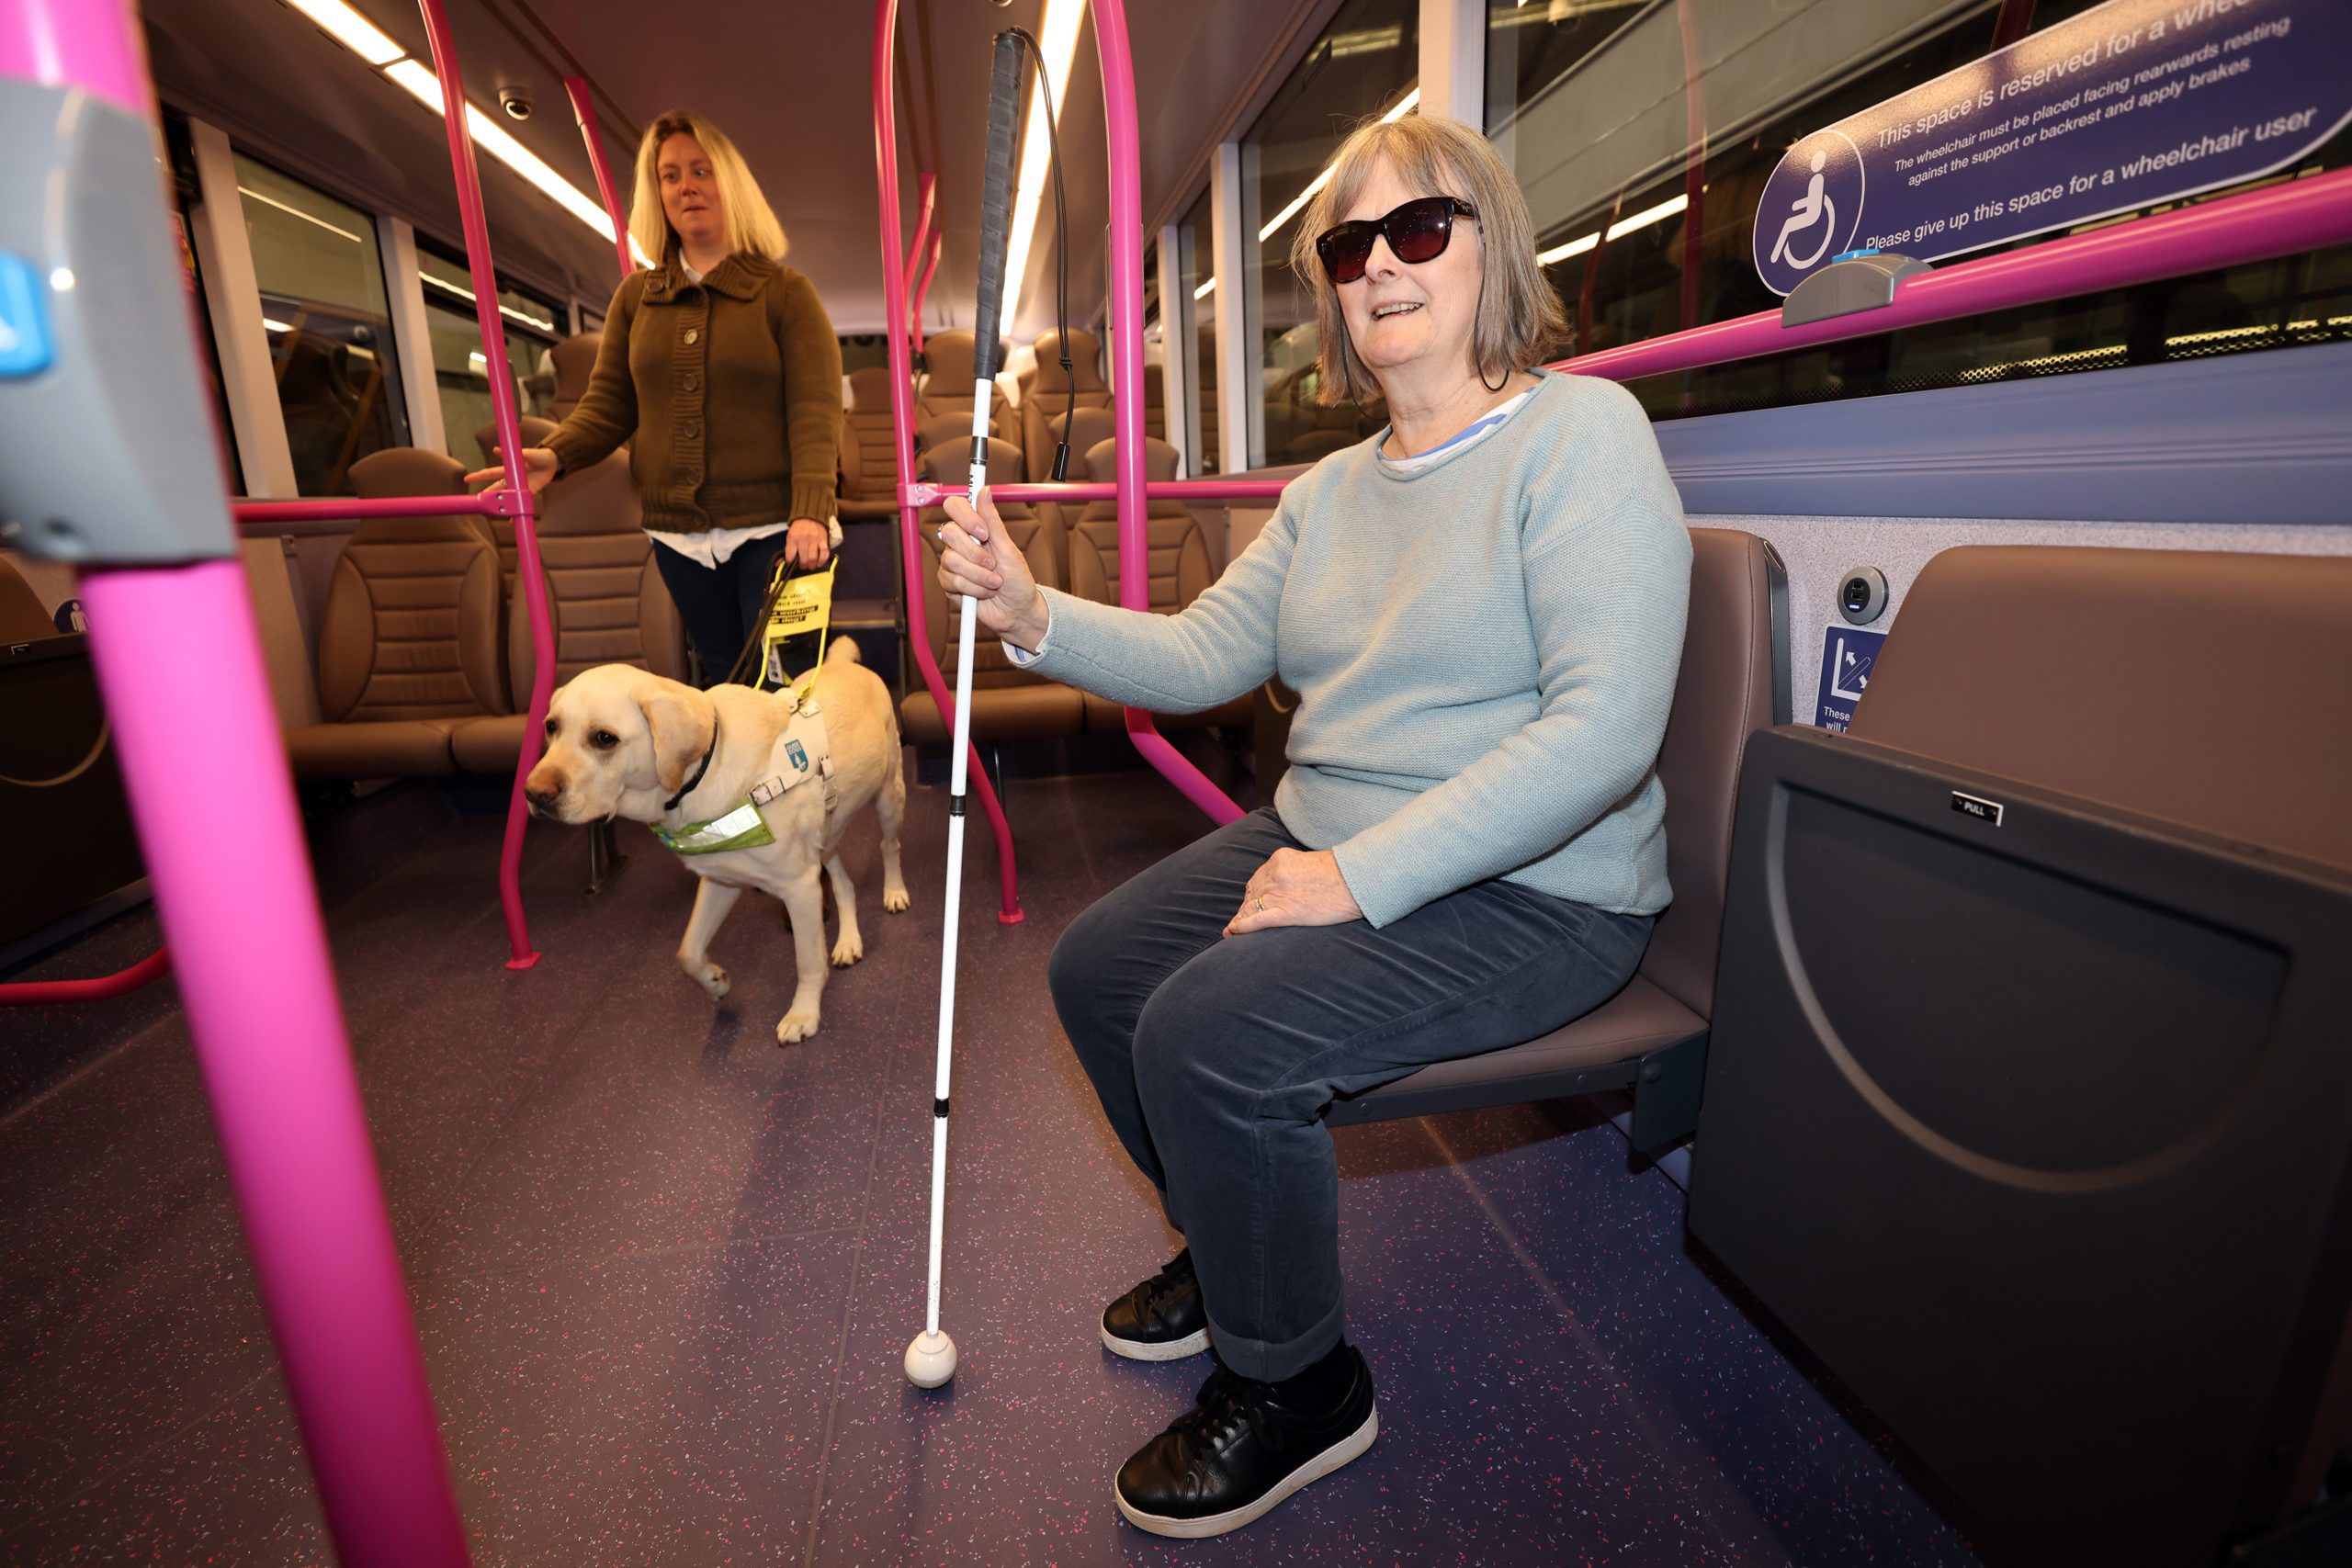 York Sight Loss Council members Verity (with her guide dog Ted) and Josie Clarke on a bus at the First Bus - York bus depot training school 19 October 2022. Josie is sat on a seat and holding a white cane. Verity is walking down the centre of the bus with her guide dog.